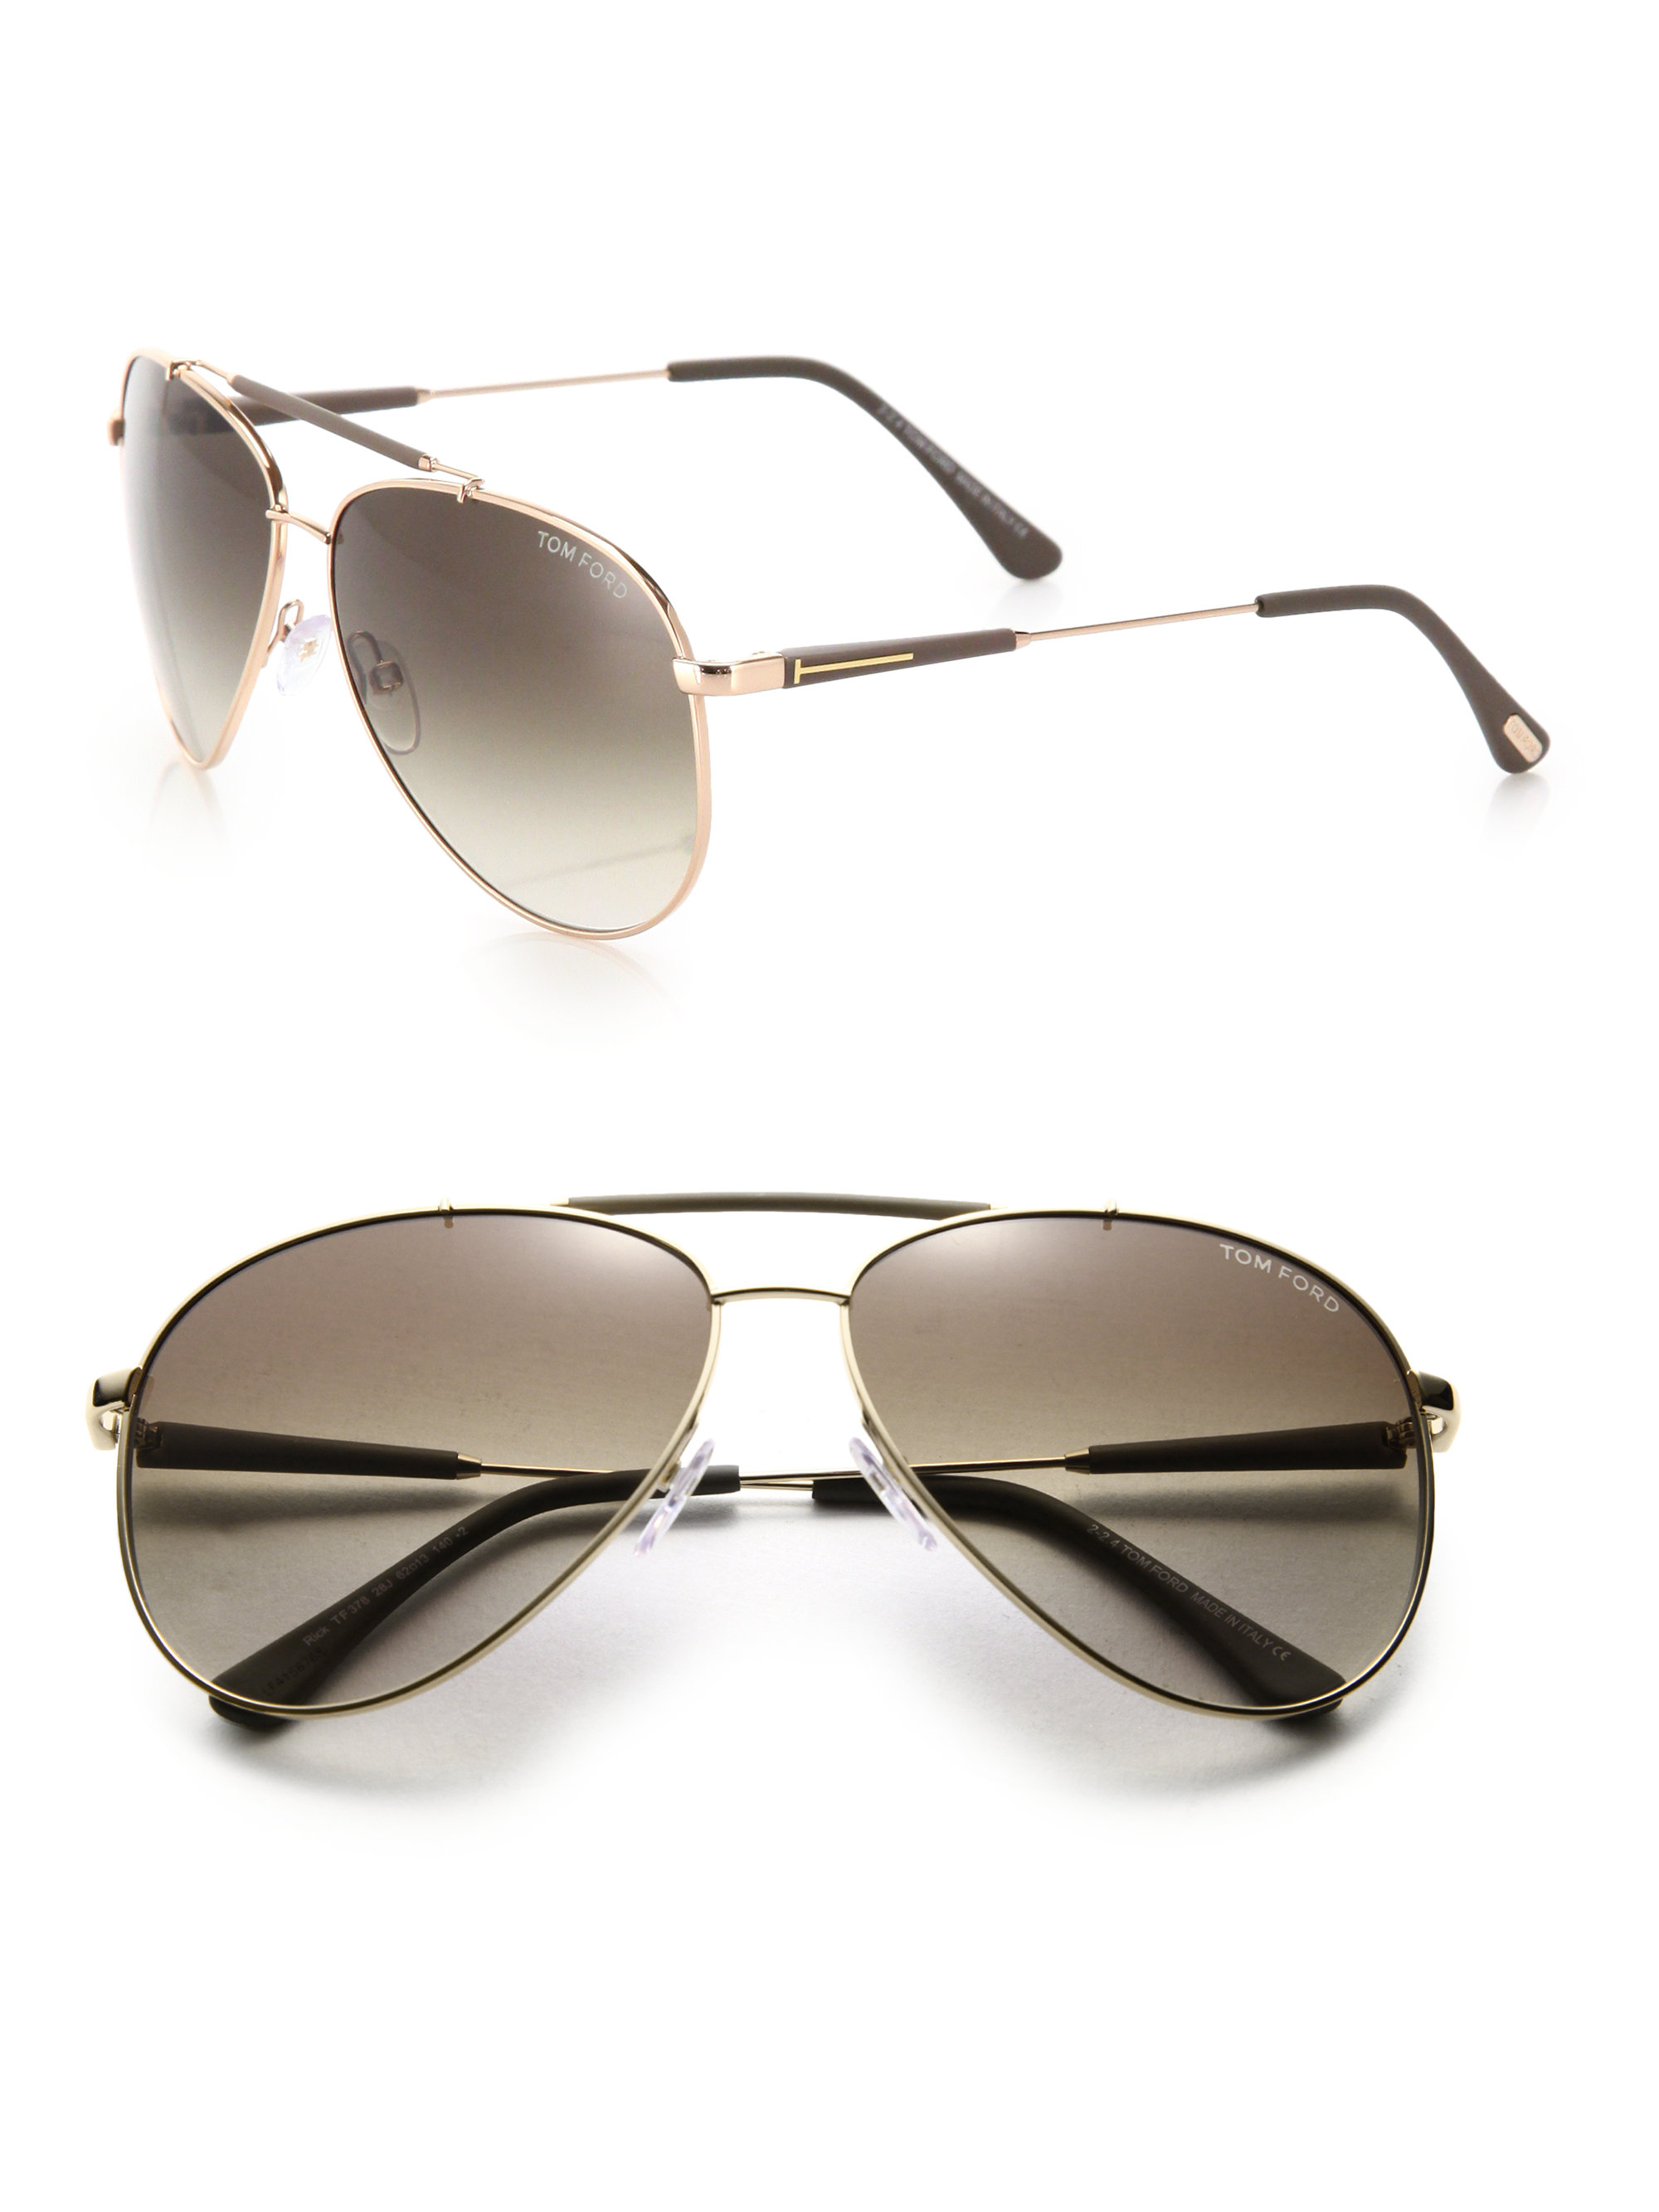 Tom Ford Rick 62Mm Aviator Sunglasses in Gray (GREY-GOLD) | Lyst